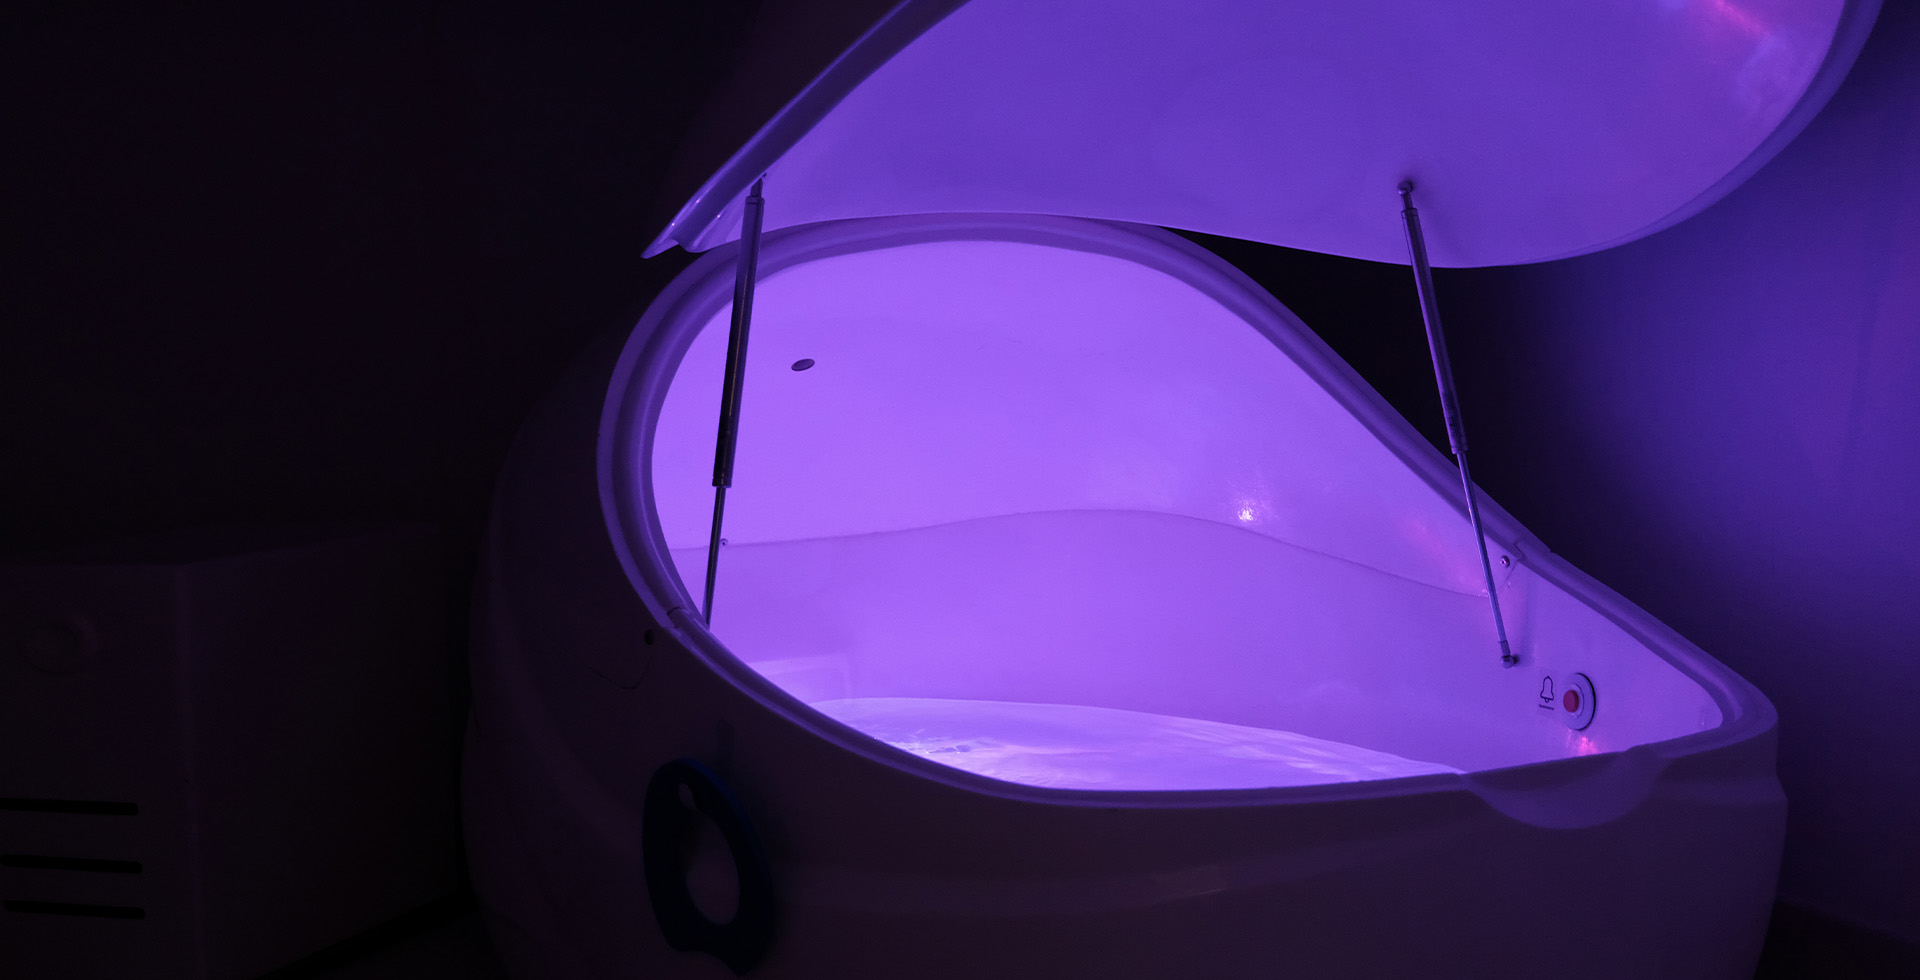 Immersive isolation tank - a masterpiece in design and tranquility.